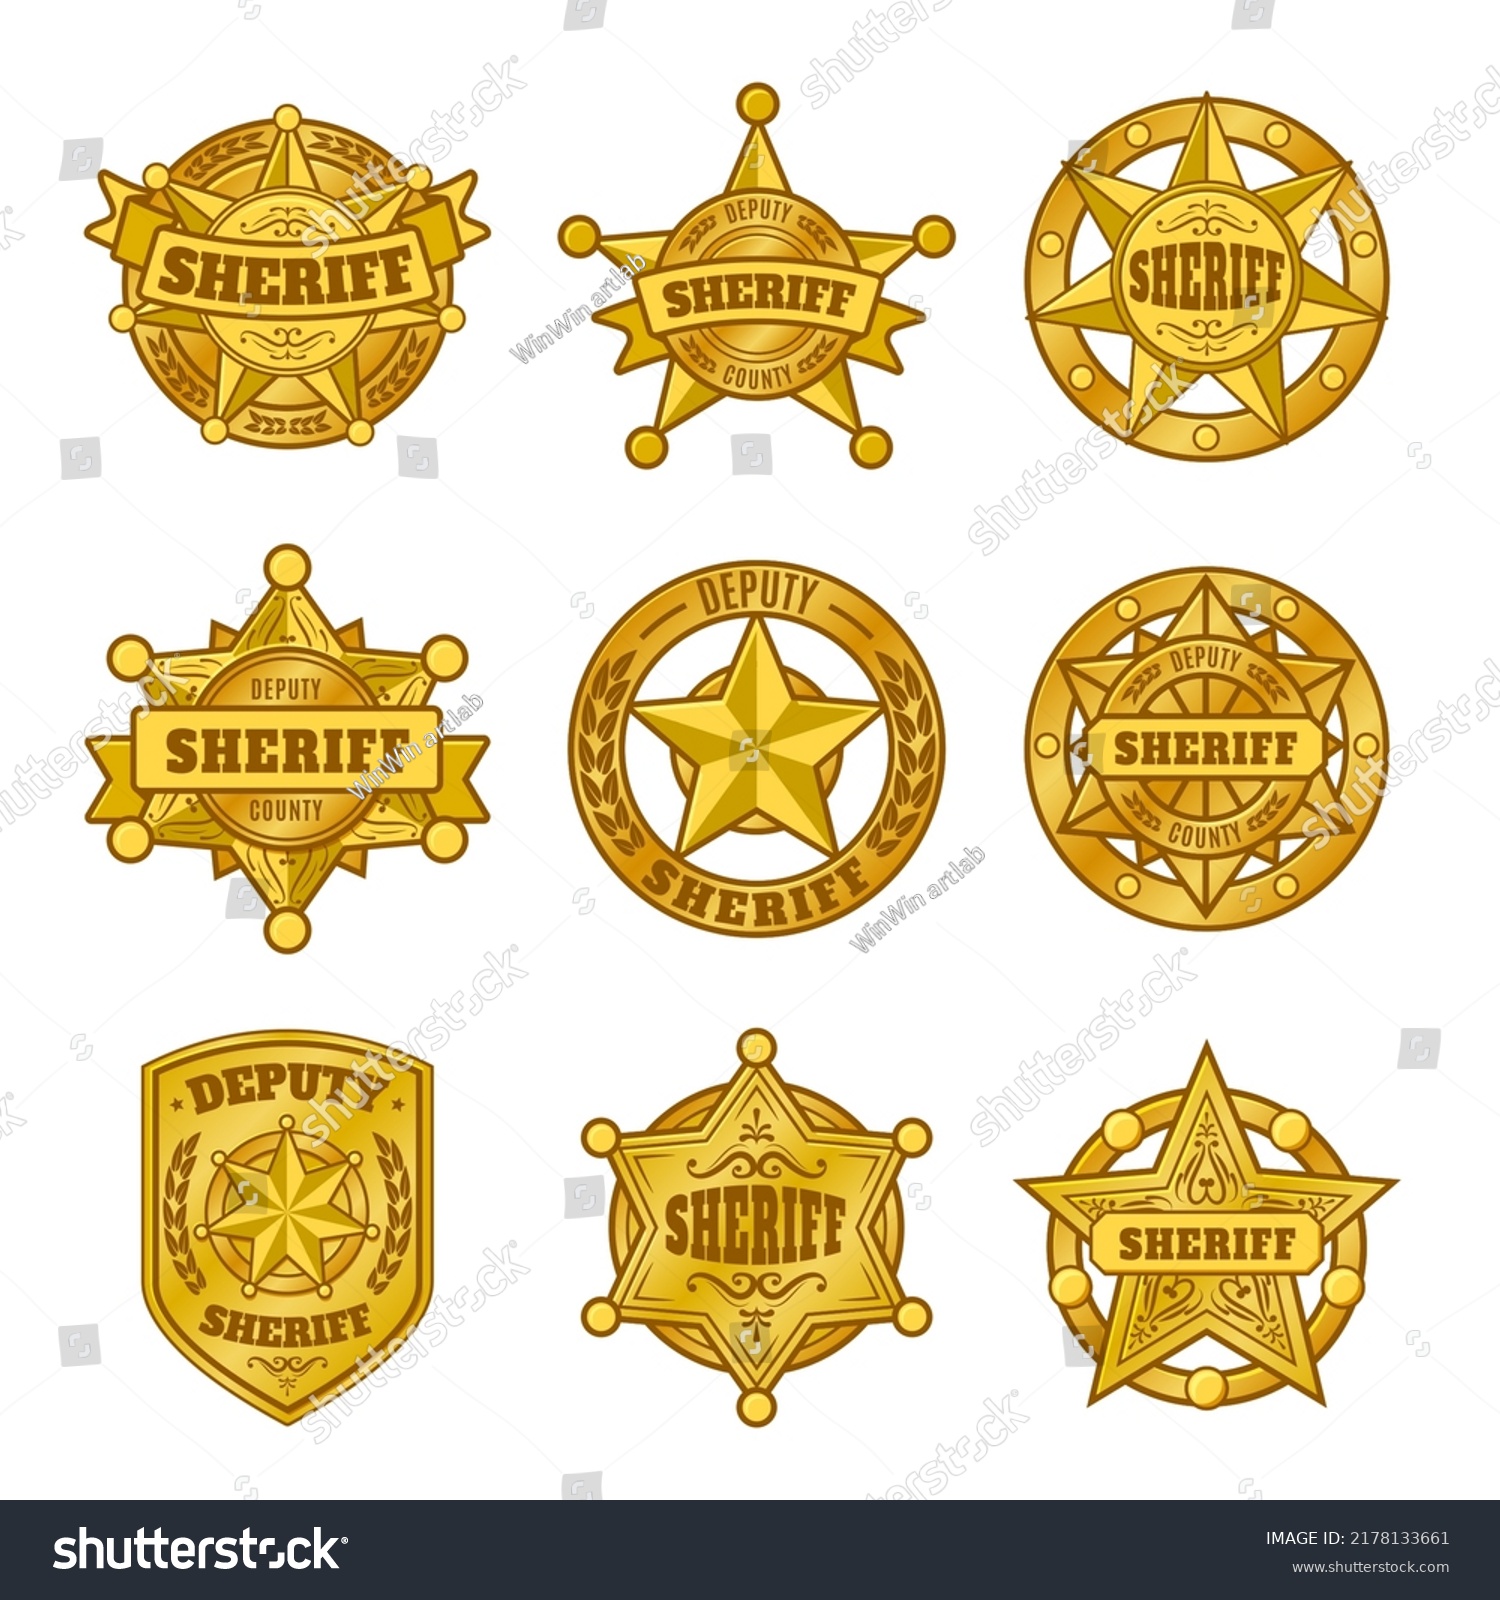 SVG of Sheriff badges. Police department emblem, golden badge with star of official representative of law. Symbols vector set. Crime prevention and investigation service signs with shields svg